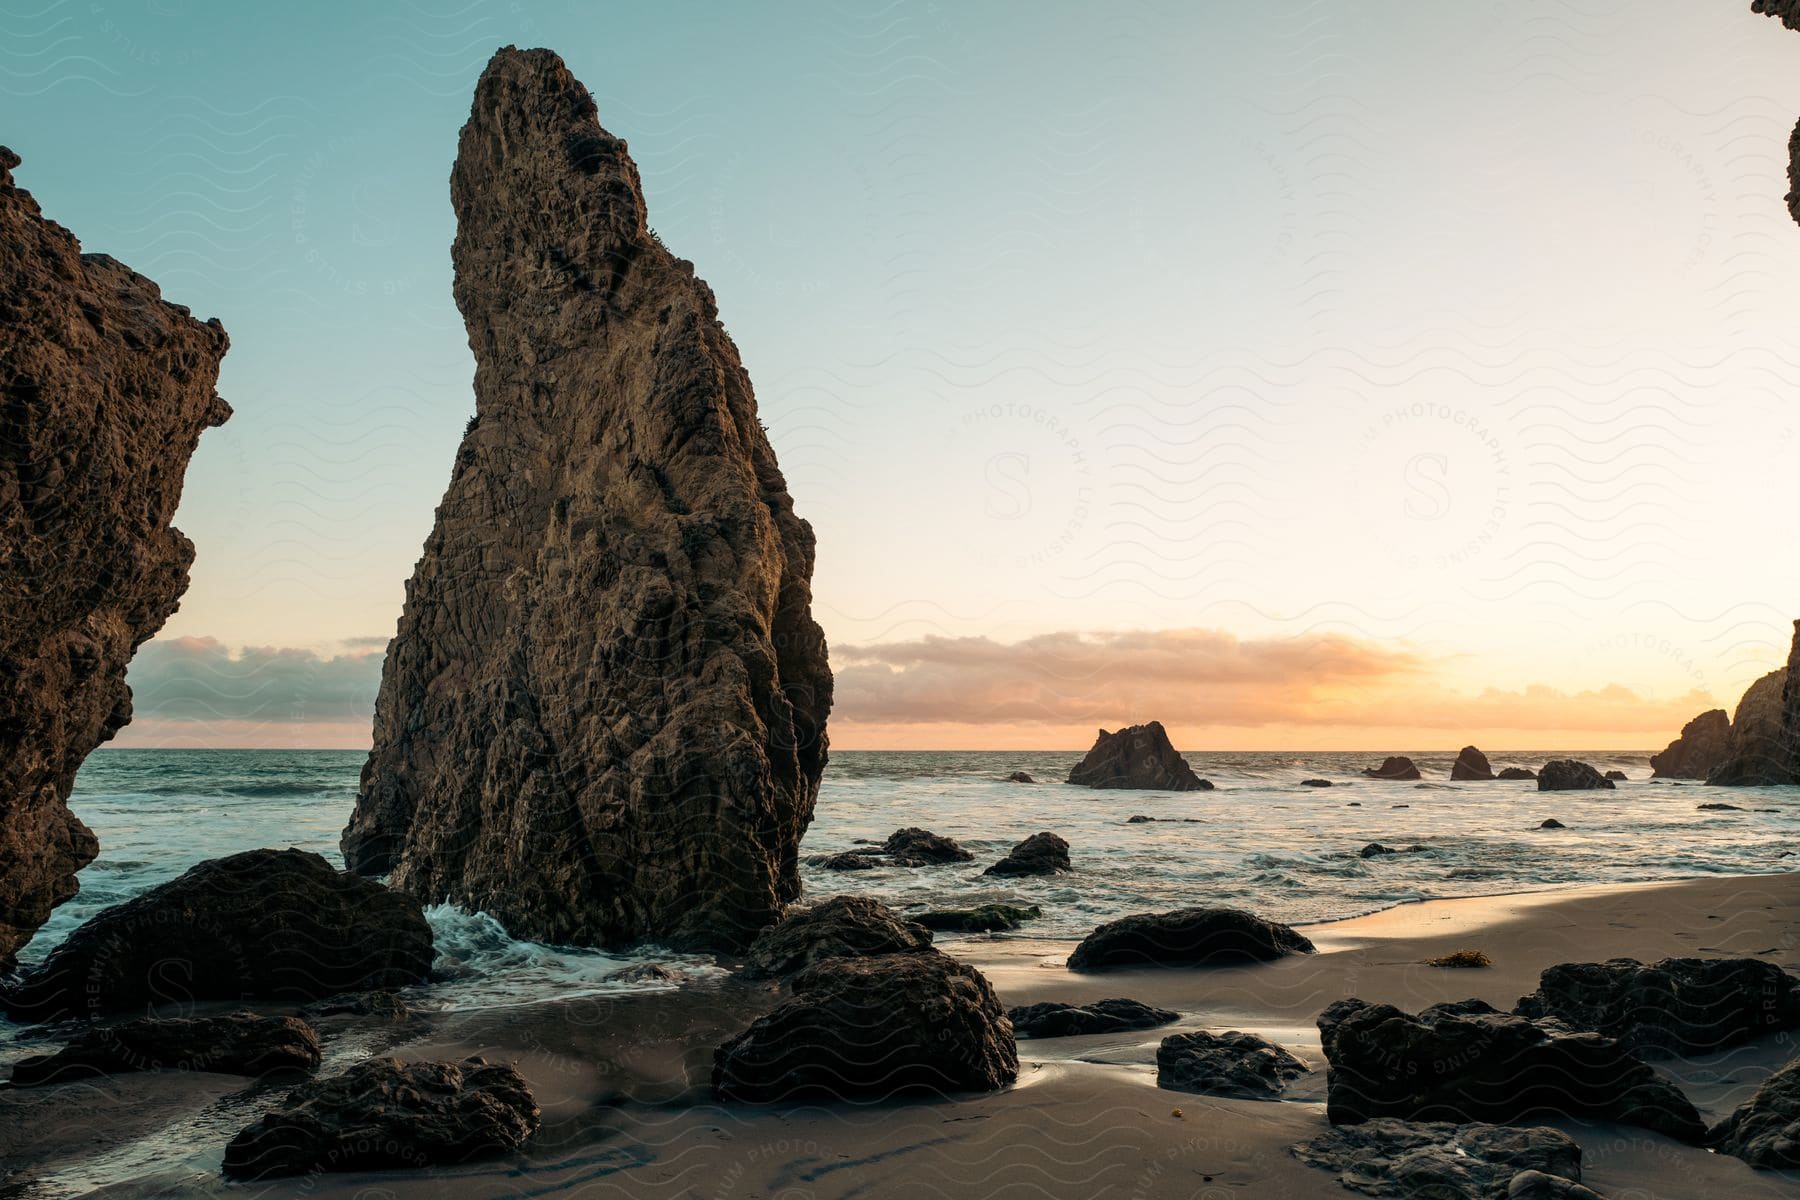 Rock formations on the ocean shore